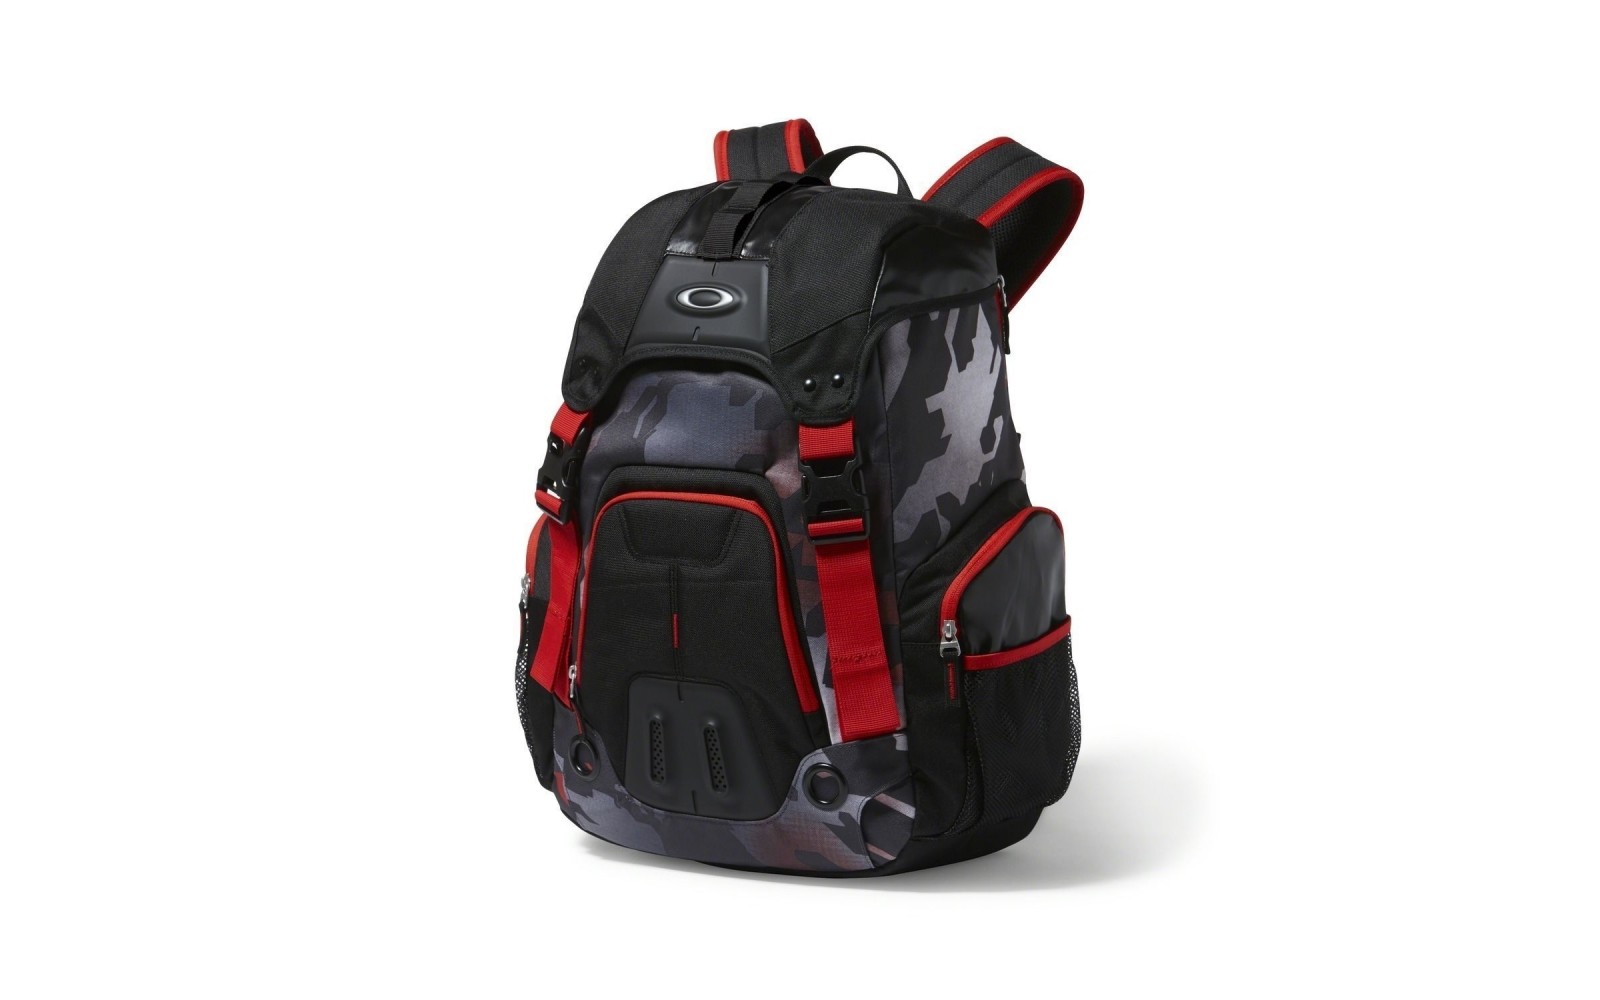 Oakley Gearbox LX Backpack - Red Line - 92908-465 Rugzak